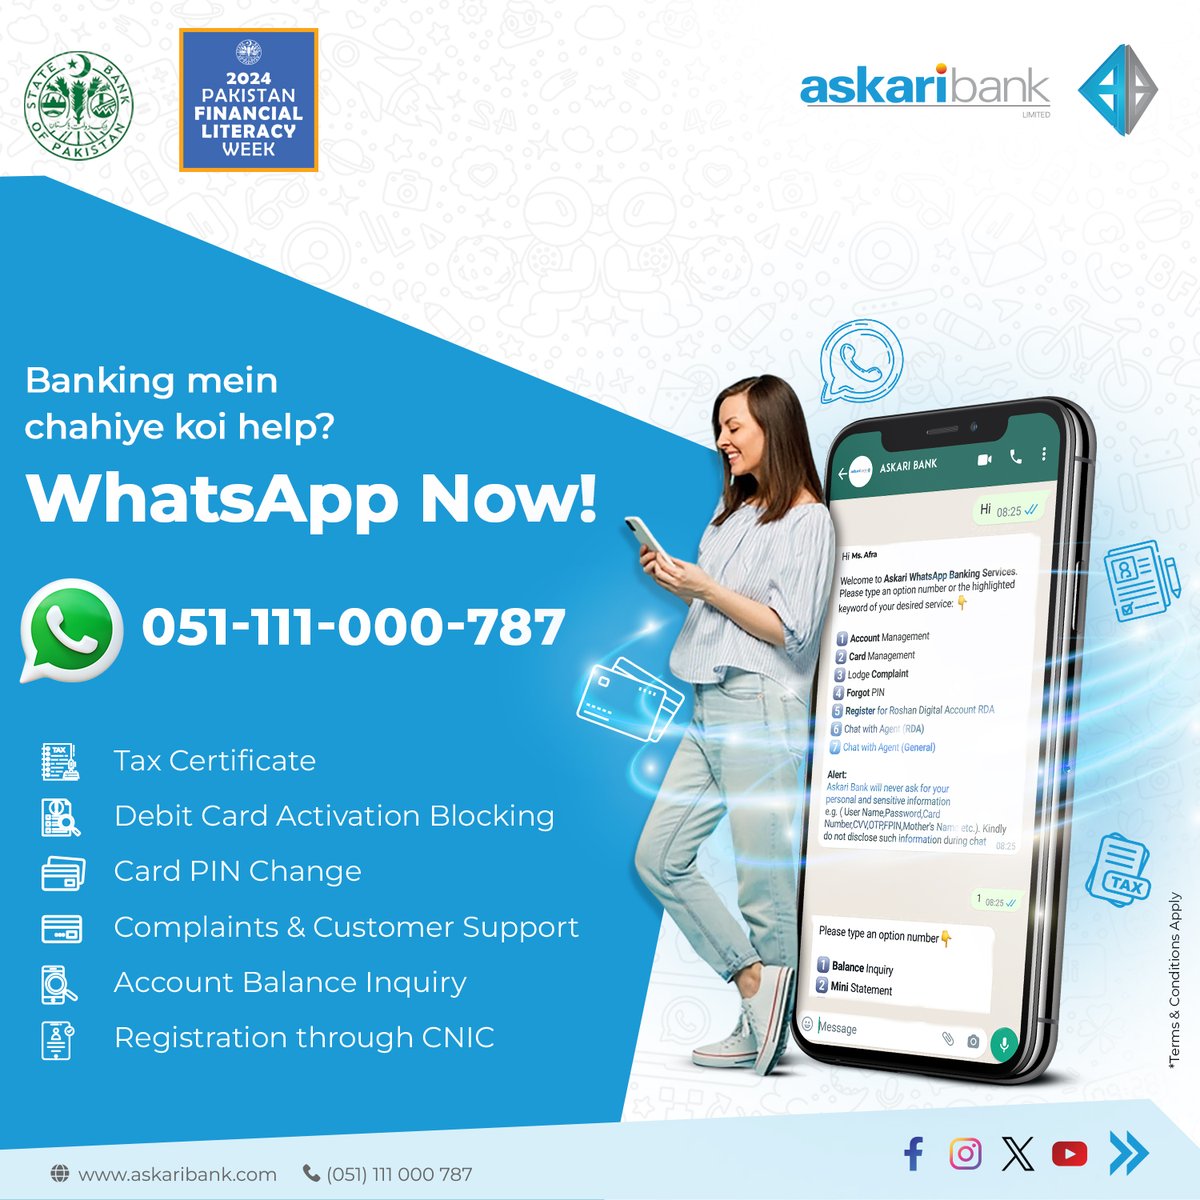 Need banking help in a snap? Askari Bank is here for you! Simply send a WhatsApp message to 051-111-000-787 and enjoy convenient access to various services. Anytime, Anywhere! #askaribank #weareheretohelp #WhatsAppbanking #convenienceatyourfingertips